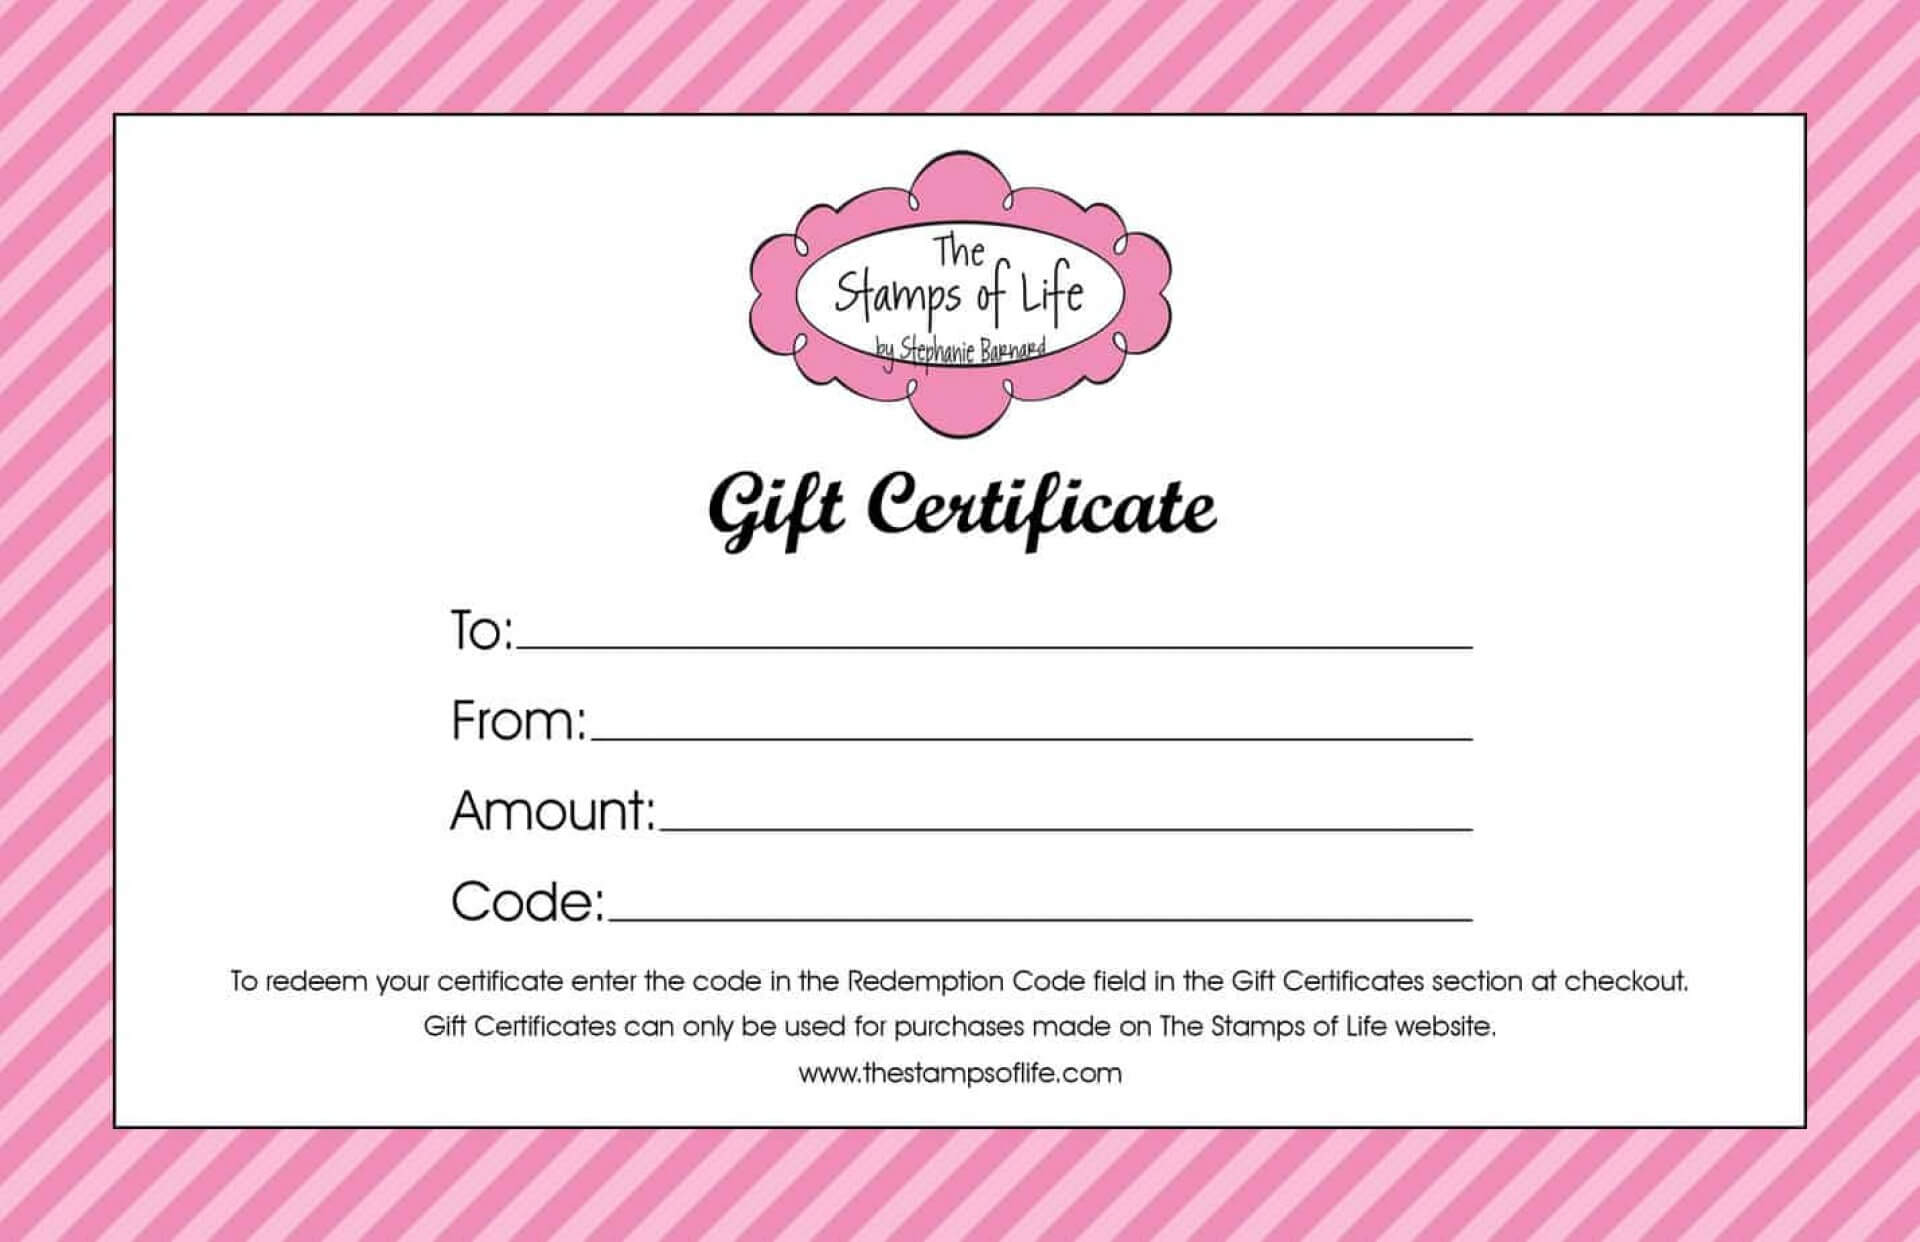 022 Template Ideas Gift Certificate Free Spruce Templates Throughout Microsoft Gift Certificate Template Free Word